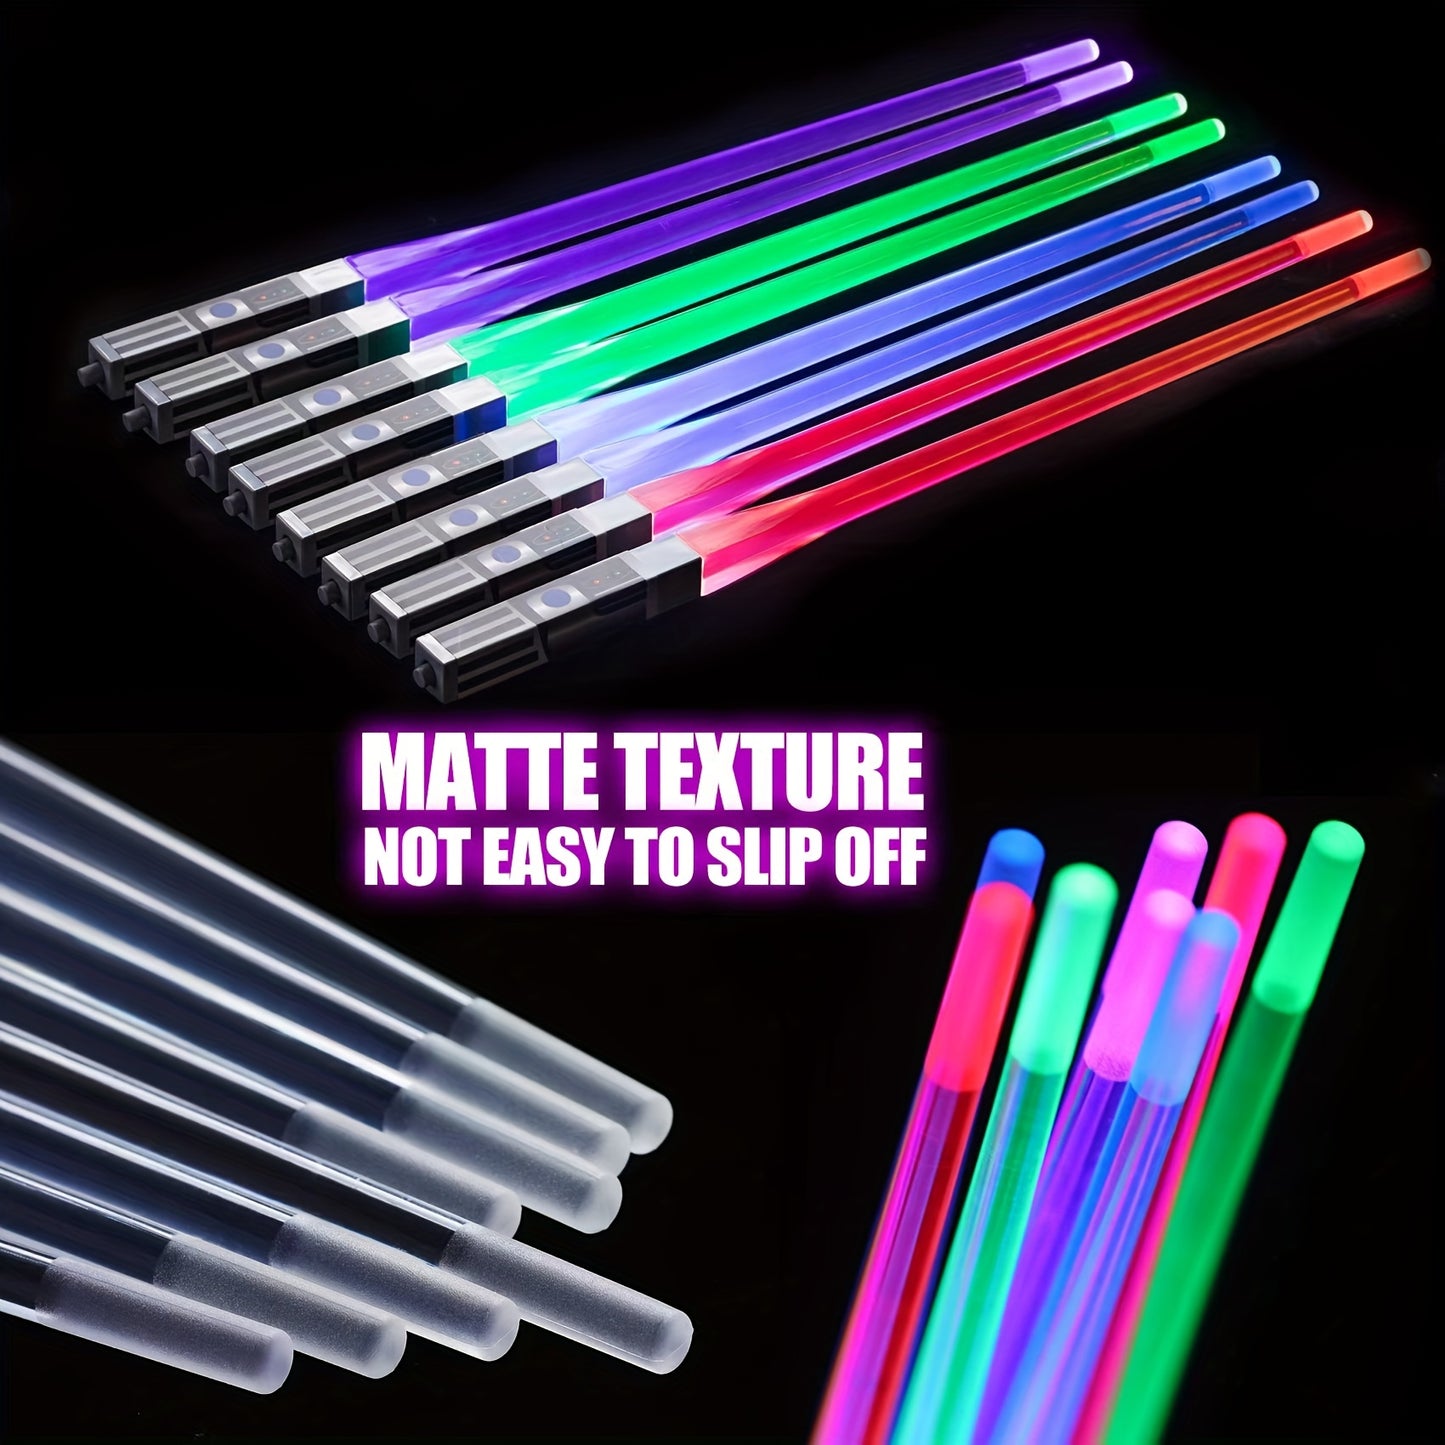 Light Up Your Sushi with These Colorful LED Chopsticks - Reusable & Battery-Free!